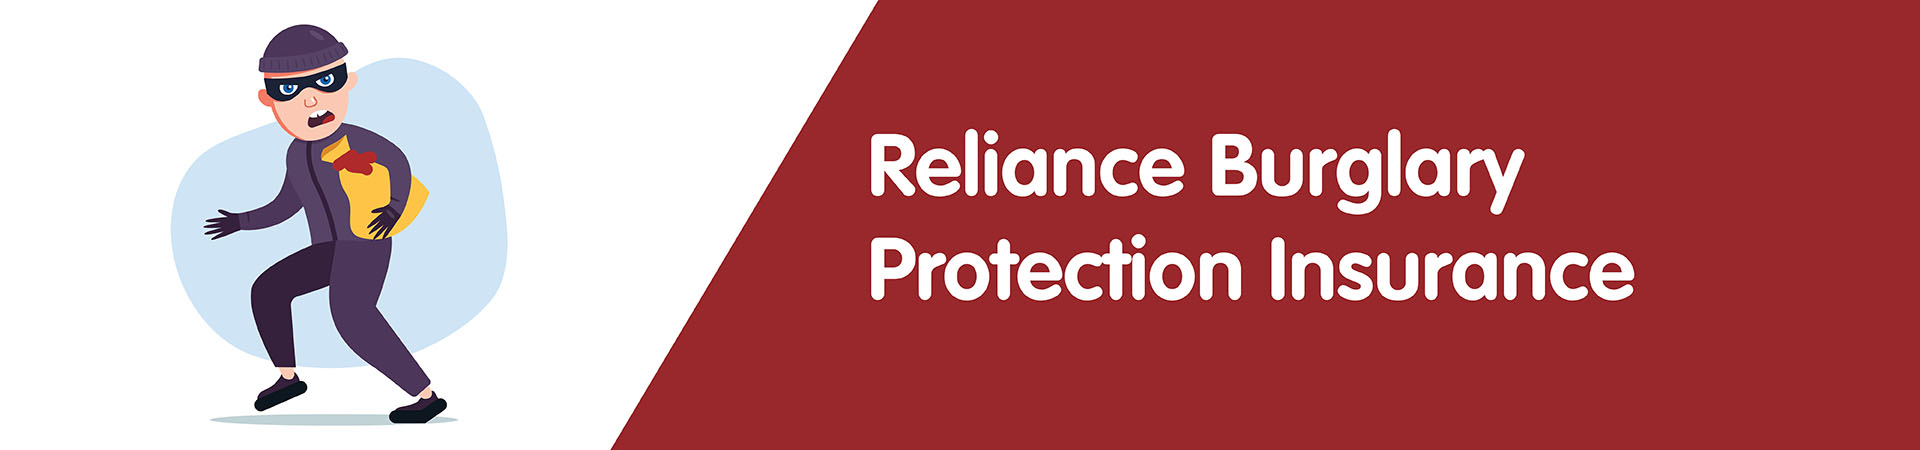 Reliance Burglary Protect Policy for NRI